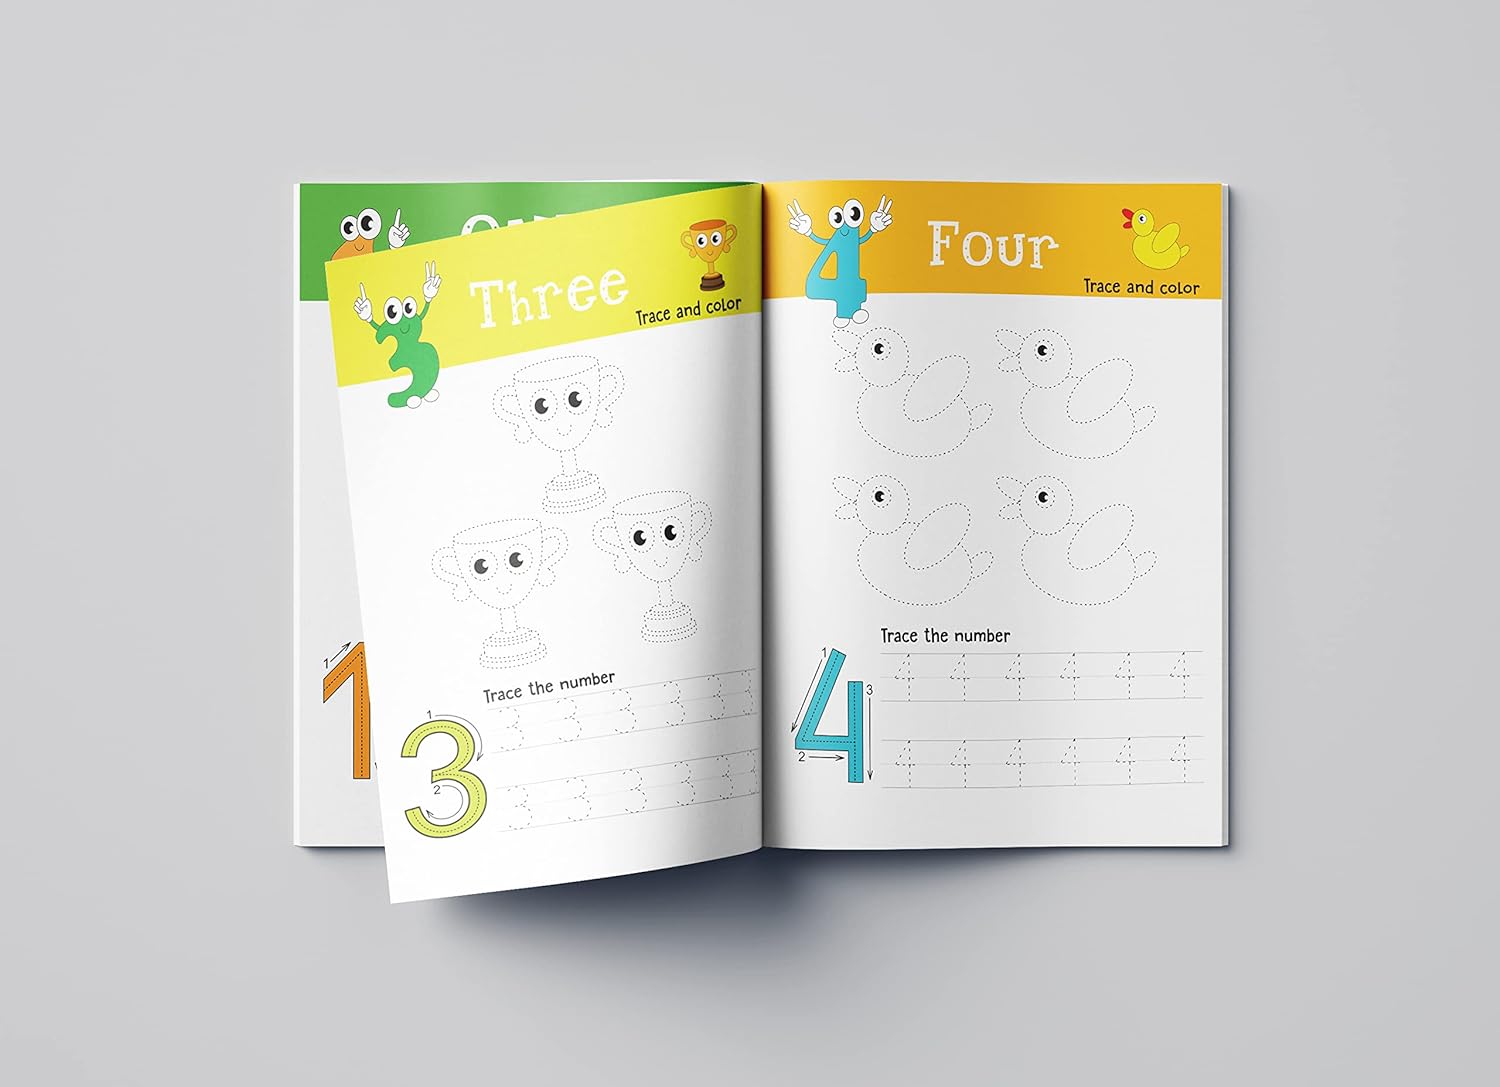 123 - Numbers 1-10 Tracing Book For Age 2+